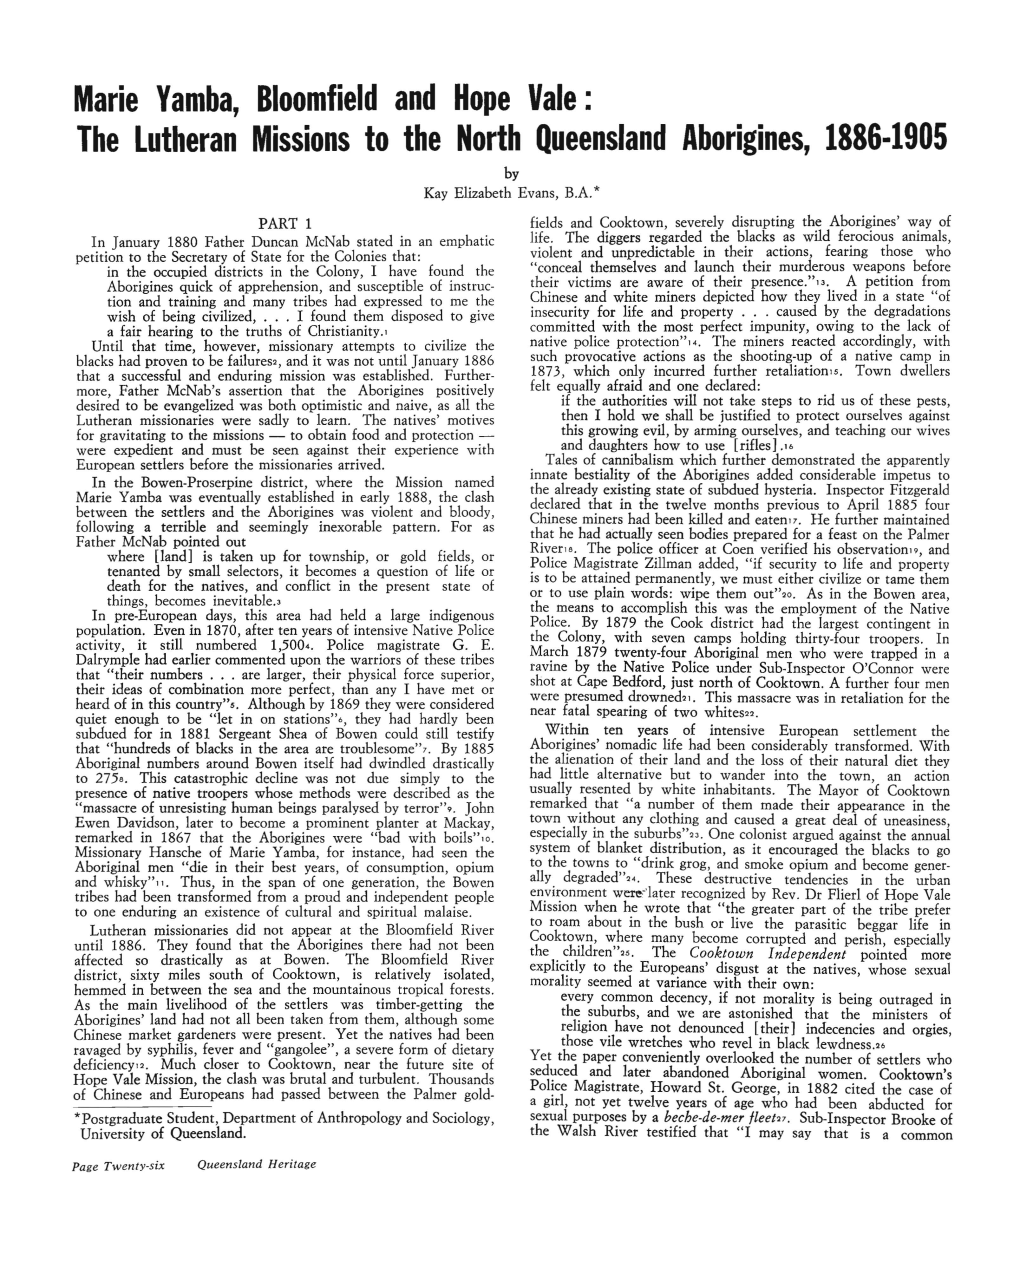 Marie Yamba, Bloomfield and Hope Vale: the Lutheran Missions to the North Queensland Aborigines, 1886·1905 by Kay Elizabeth Evans, B.A